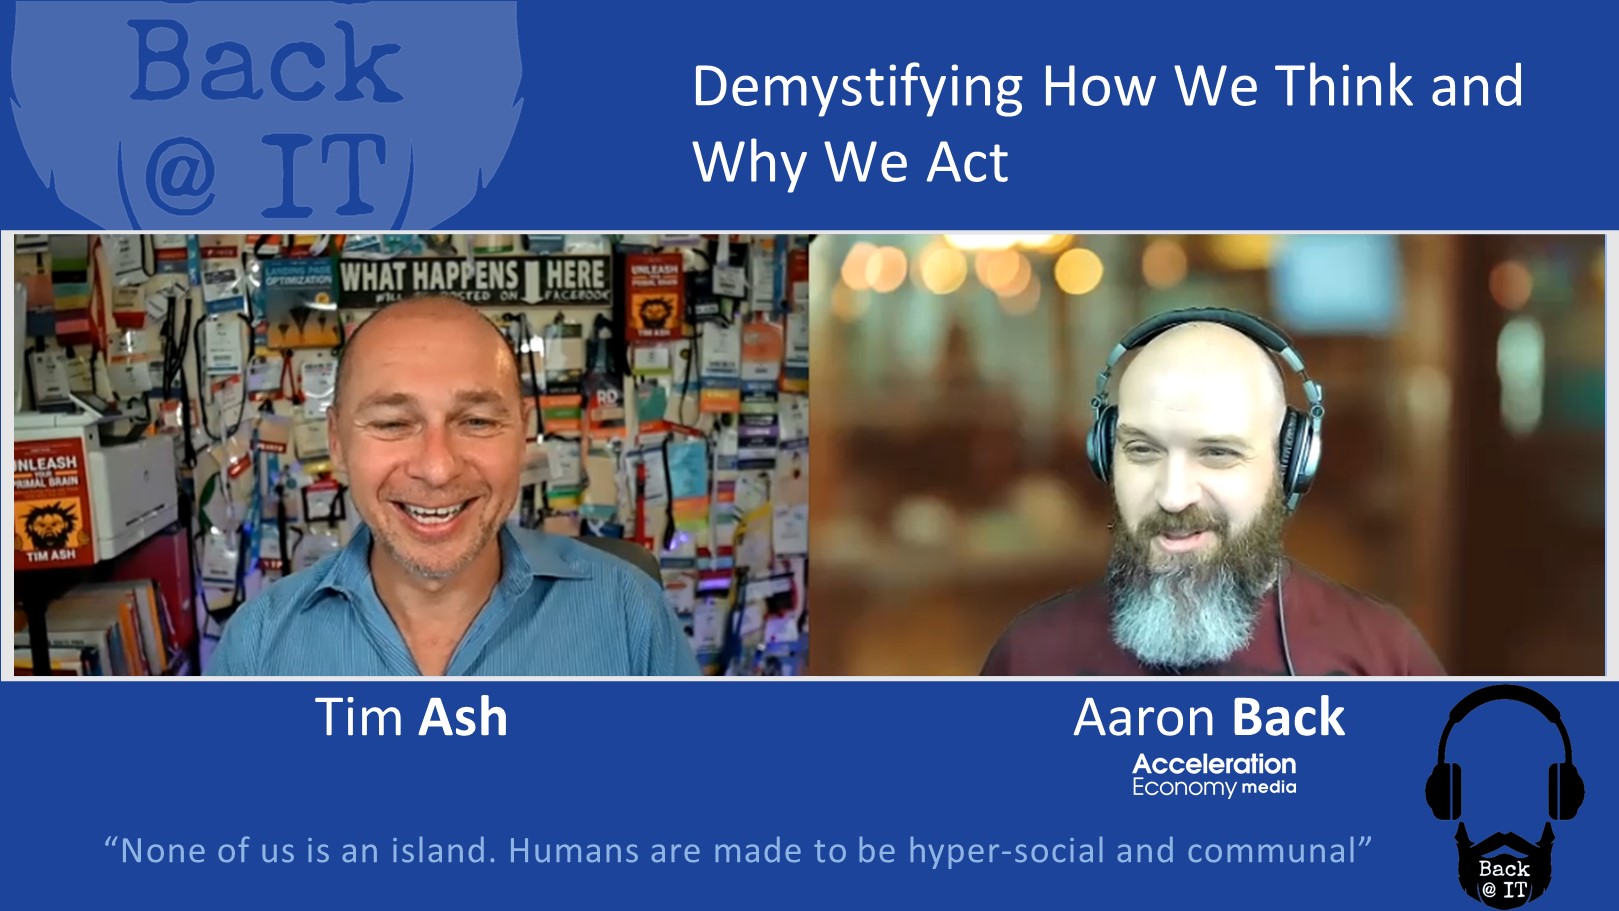 Back @ IT: Demystifying How We Think and Why We Act with Tim Ash